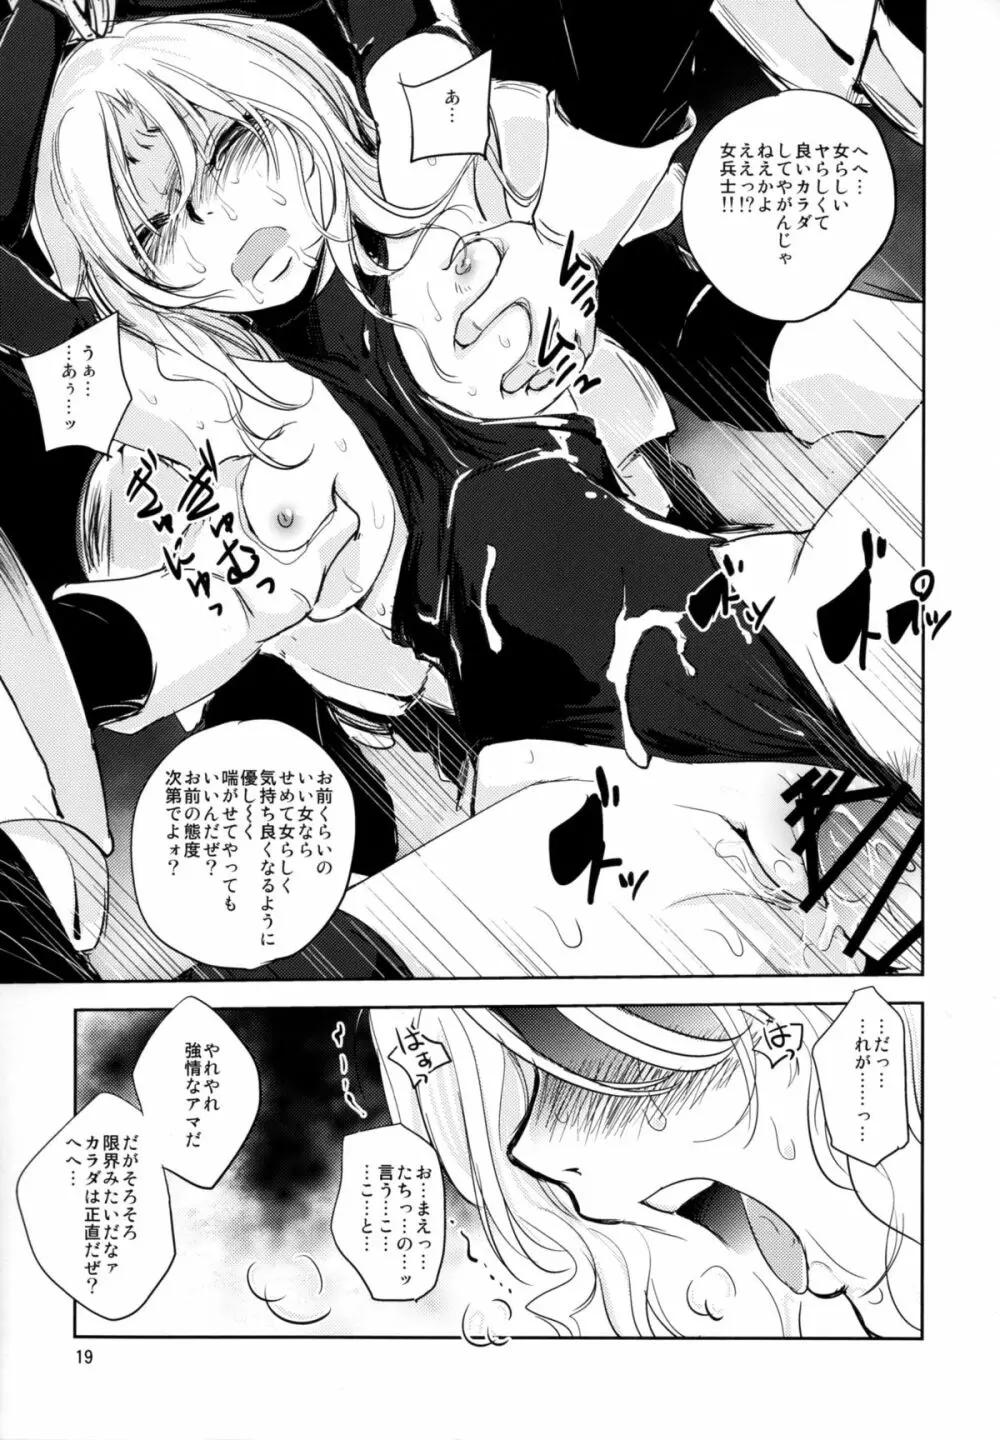 GRASSEN'S WAR ANOTHER STORY Ex #05 ノード侵攻 V Page.19